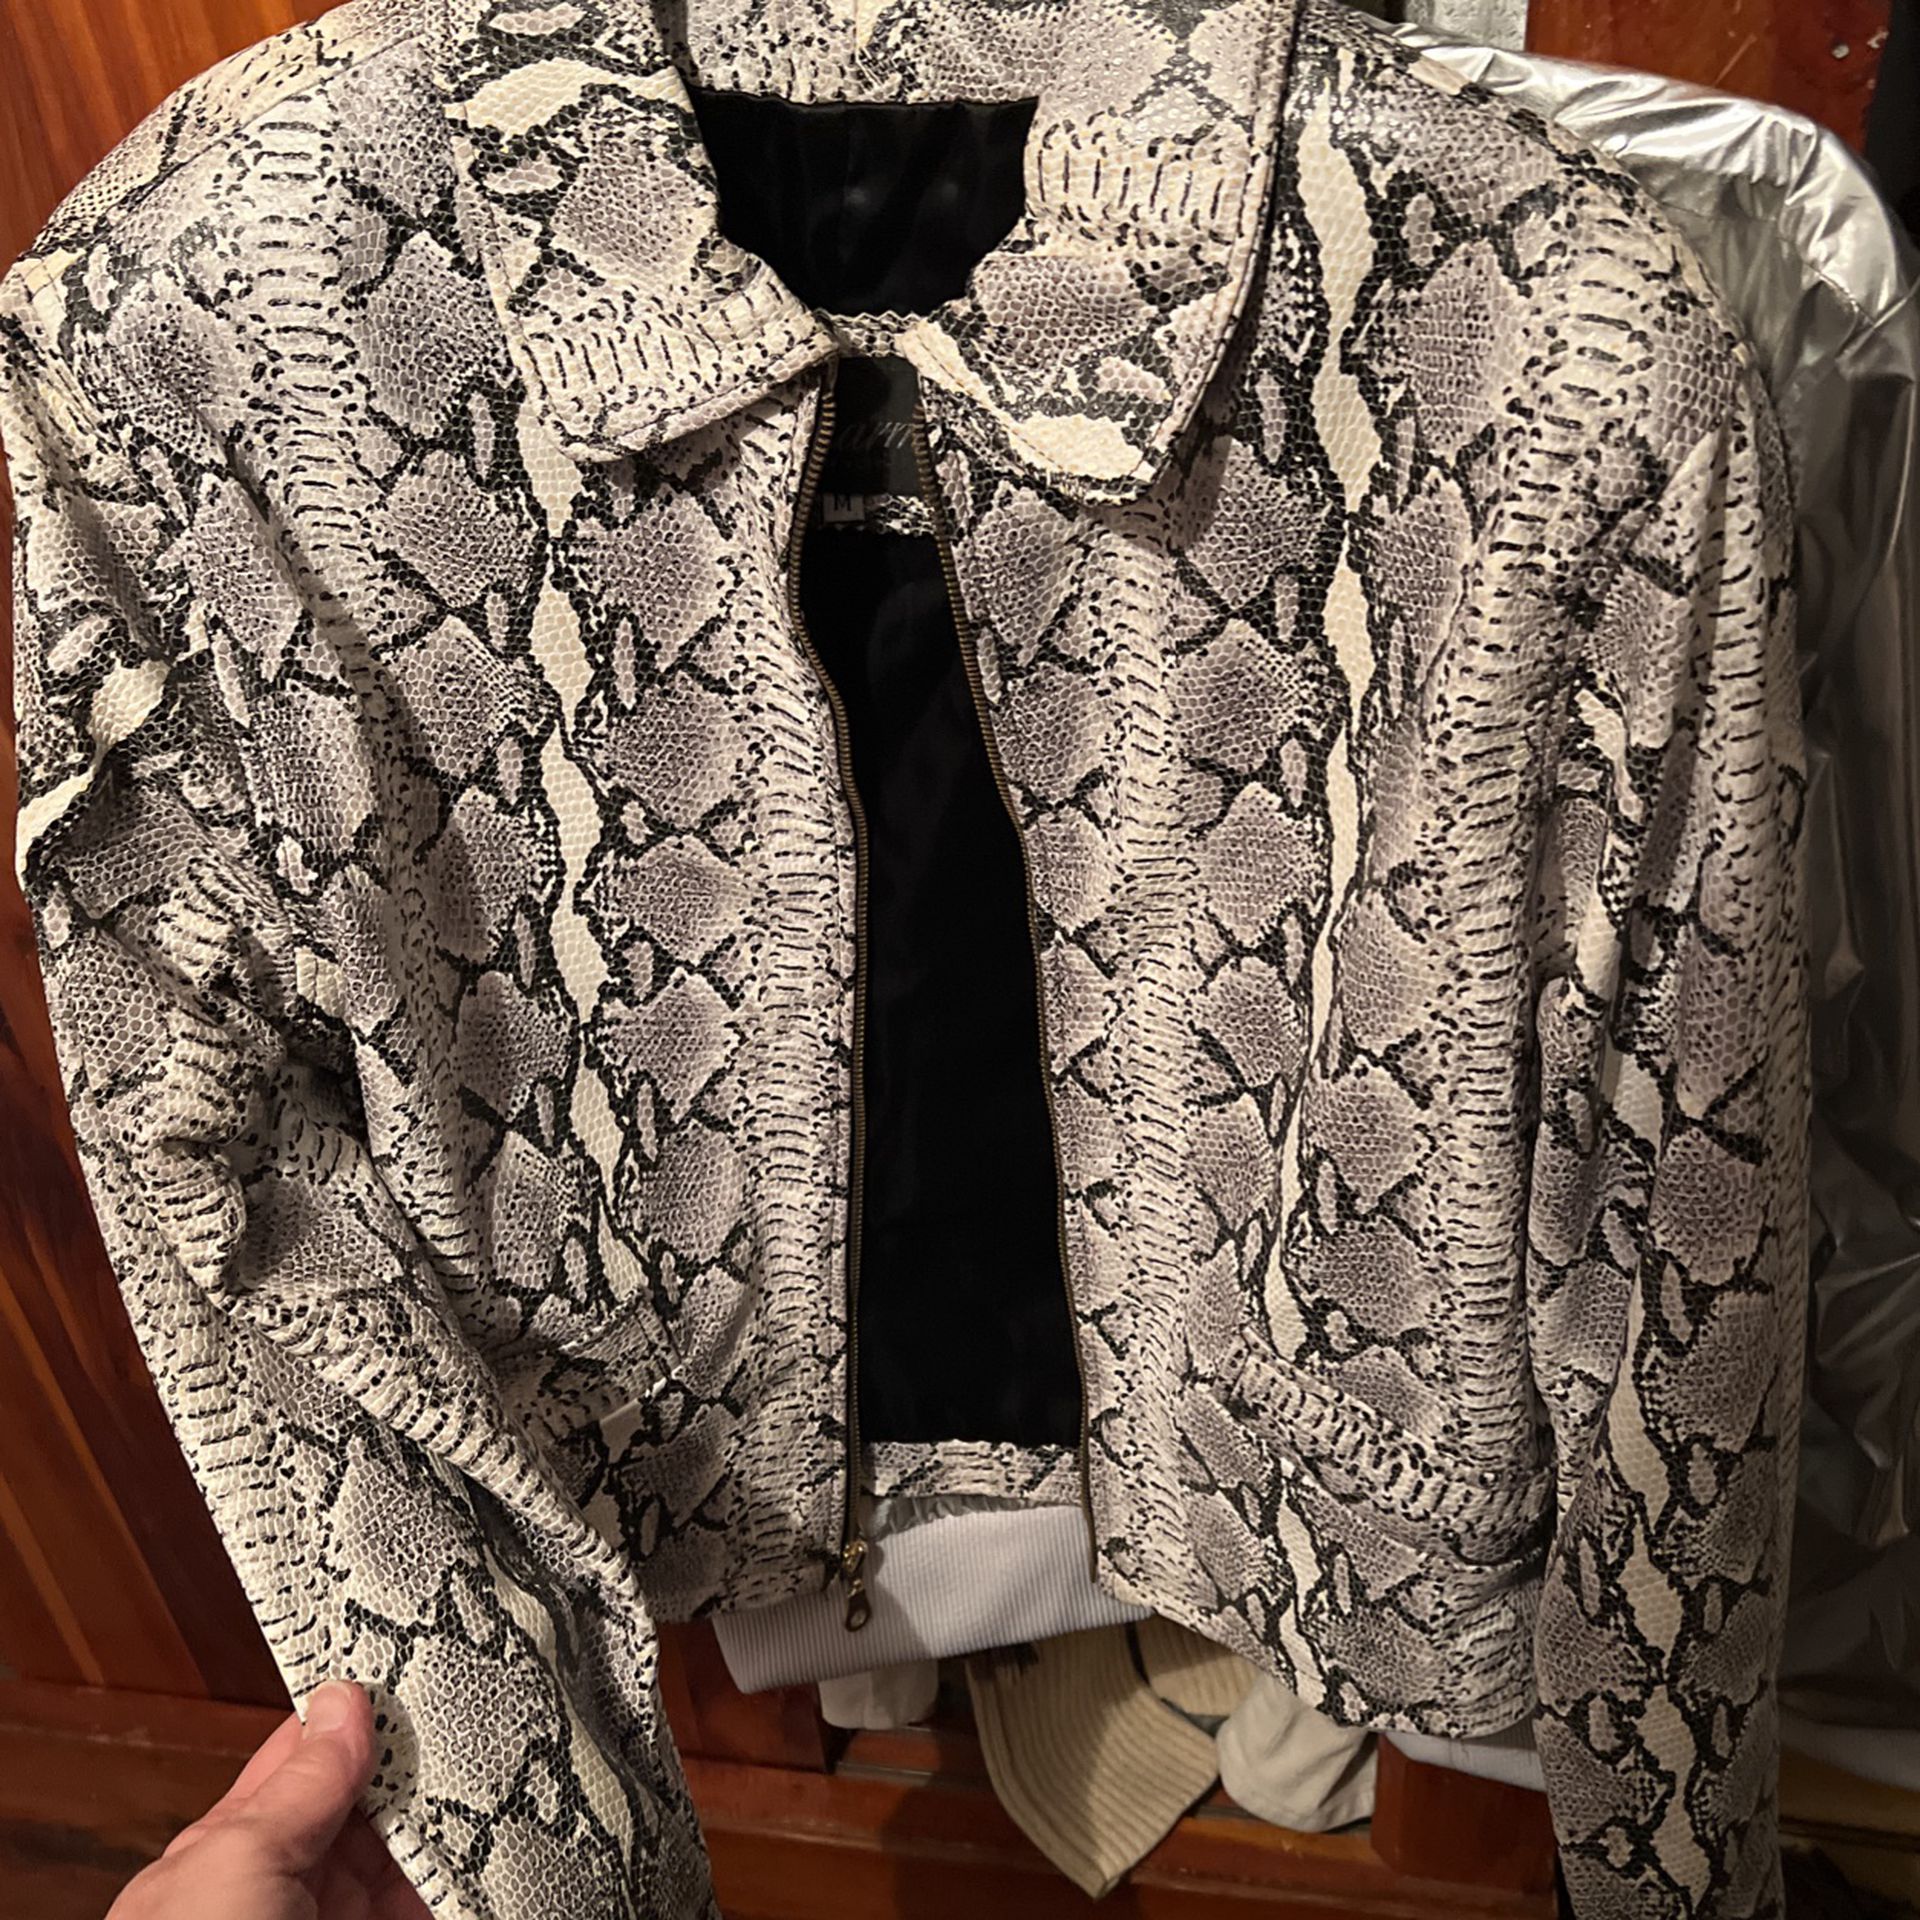 GENUINE LEATHER SNAKESKIN JACKET SIZE MEDIUM  2 FRONT POCKETS BLACK AND WHITE AWESOME ZIP FRONT 